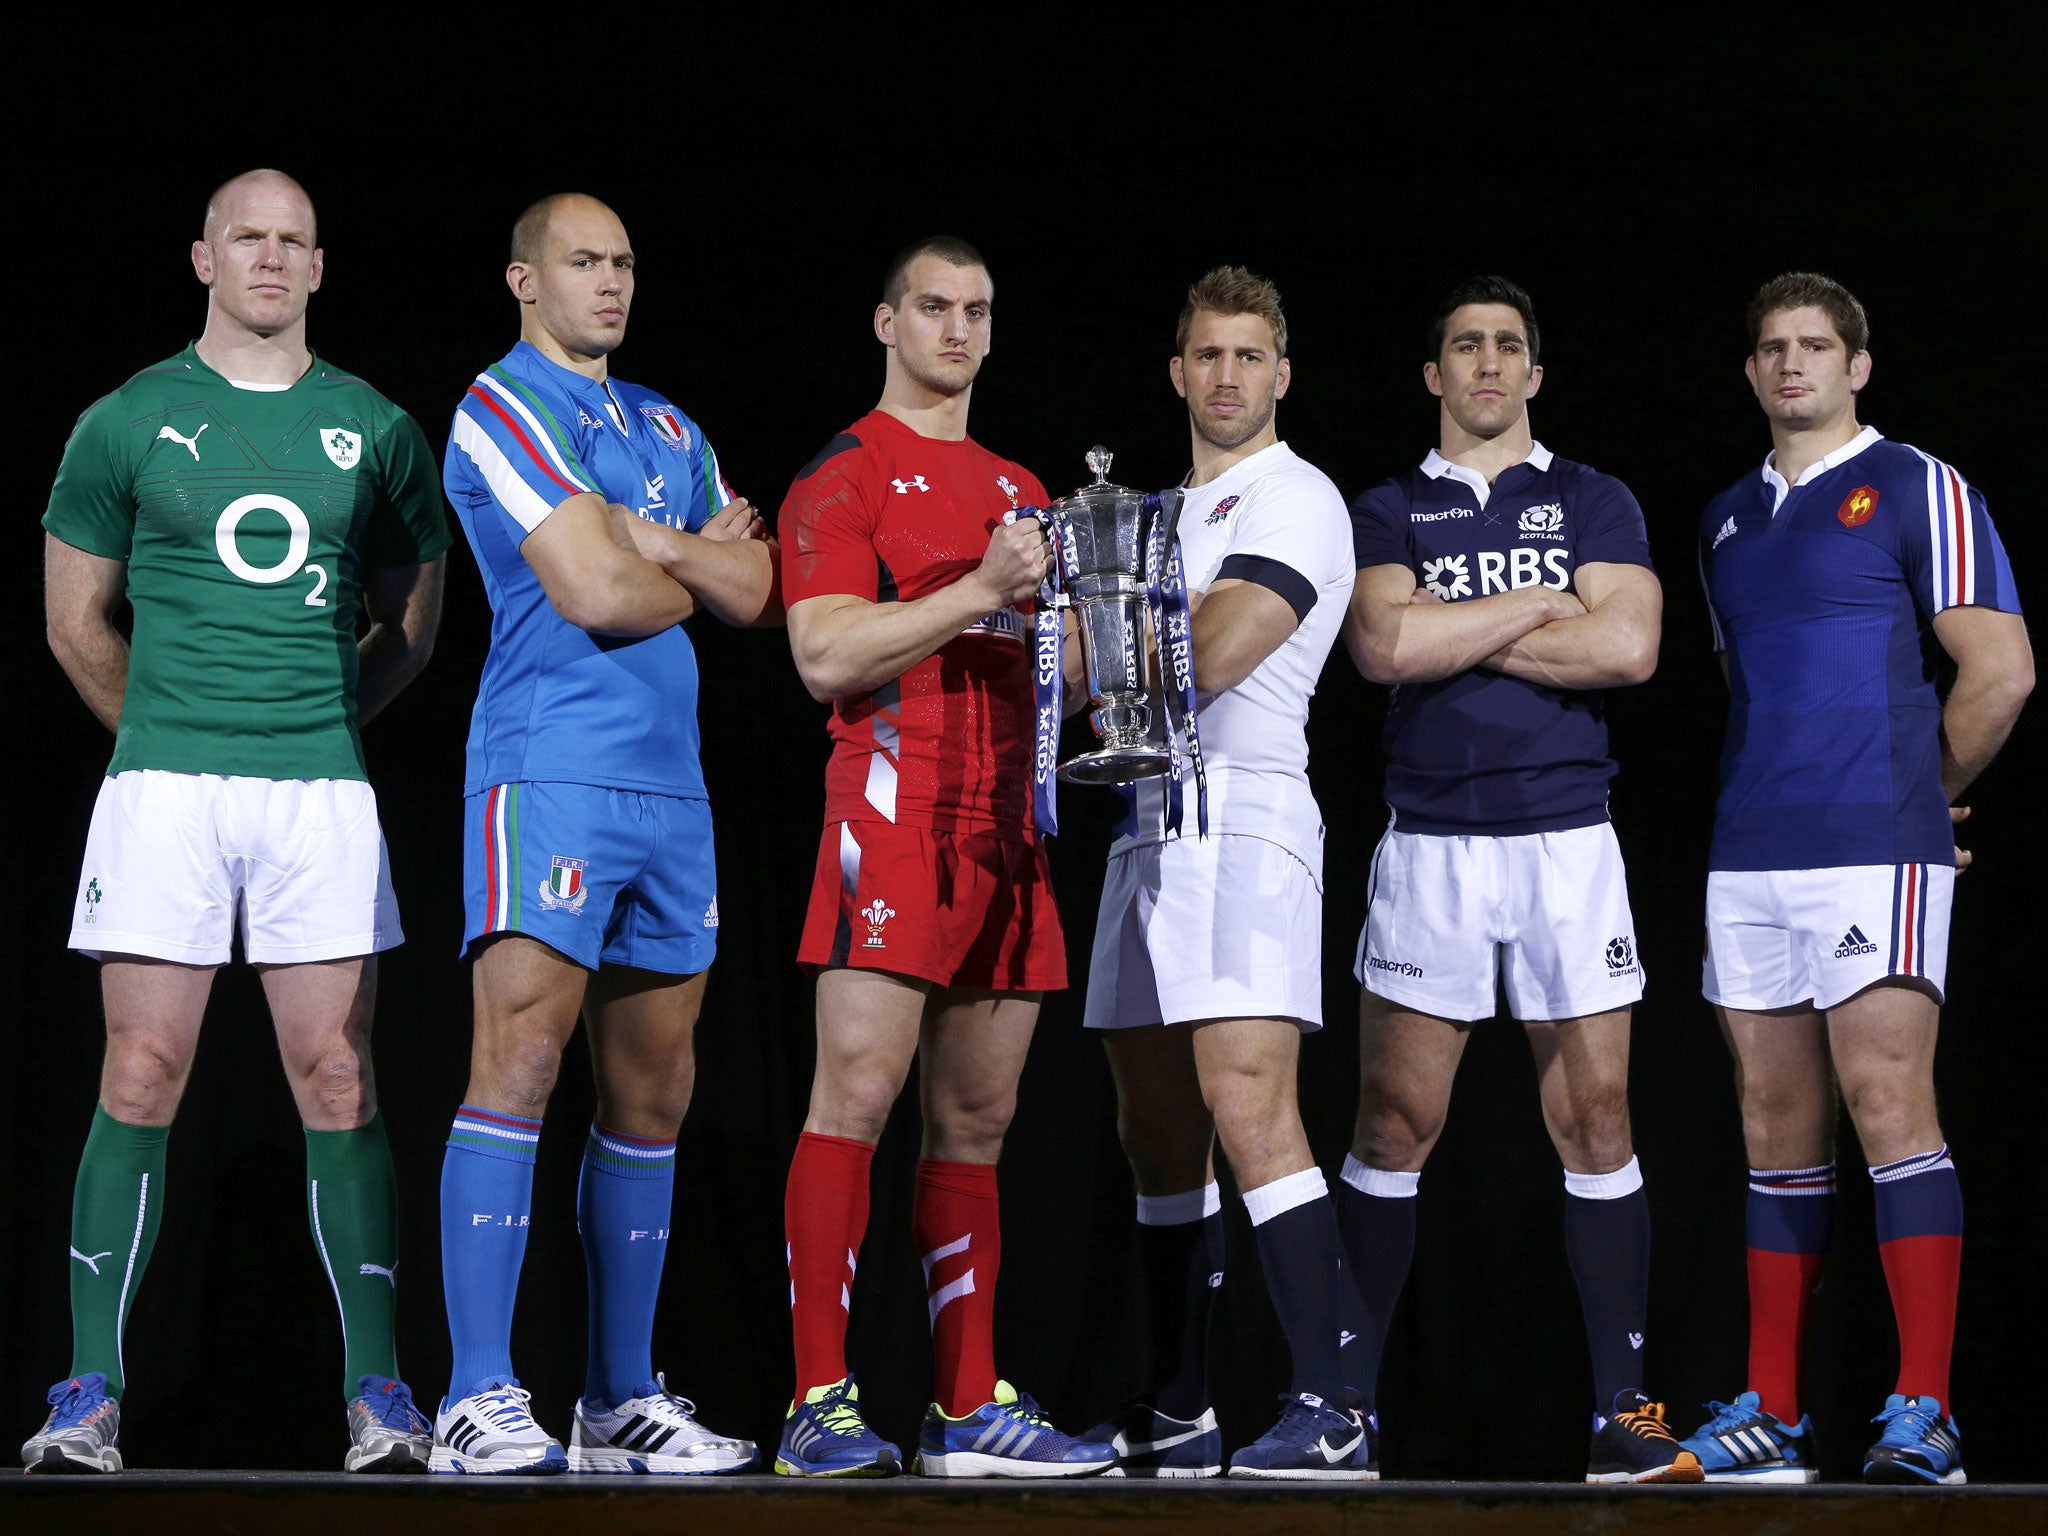 International rugby team captains (L-R) Ireland's Paul O'Connell, Italy's Sergio Parisse, Wales's Sam Warburton, England's Chris Robshaw, Scotland's Kelly Brown, France's Pascal Pape pose with the Six Nations trophy